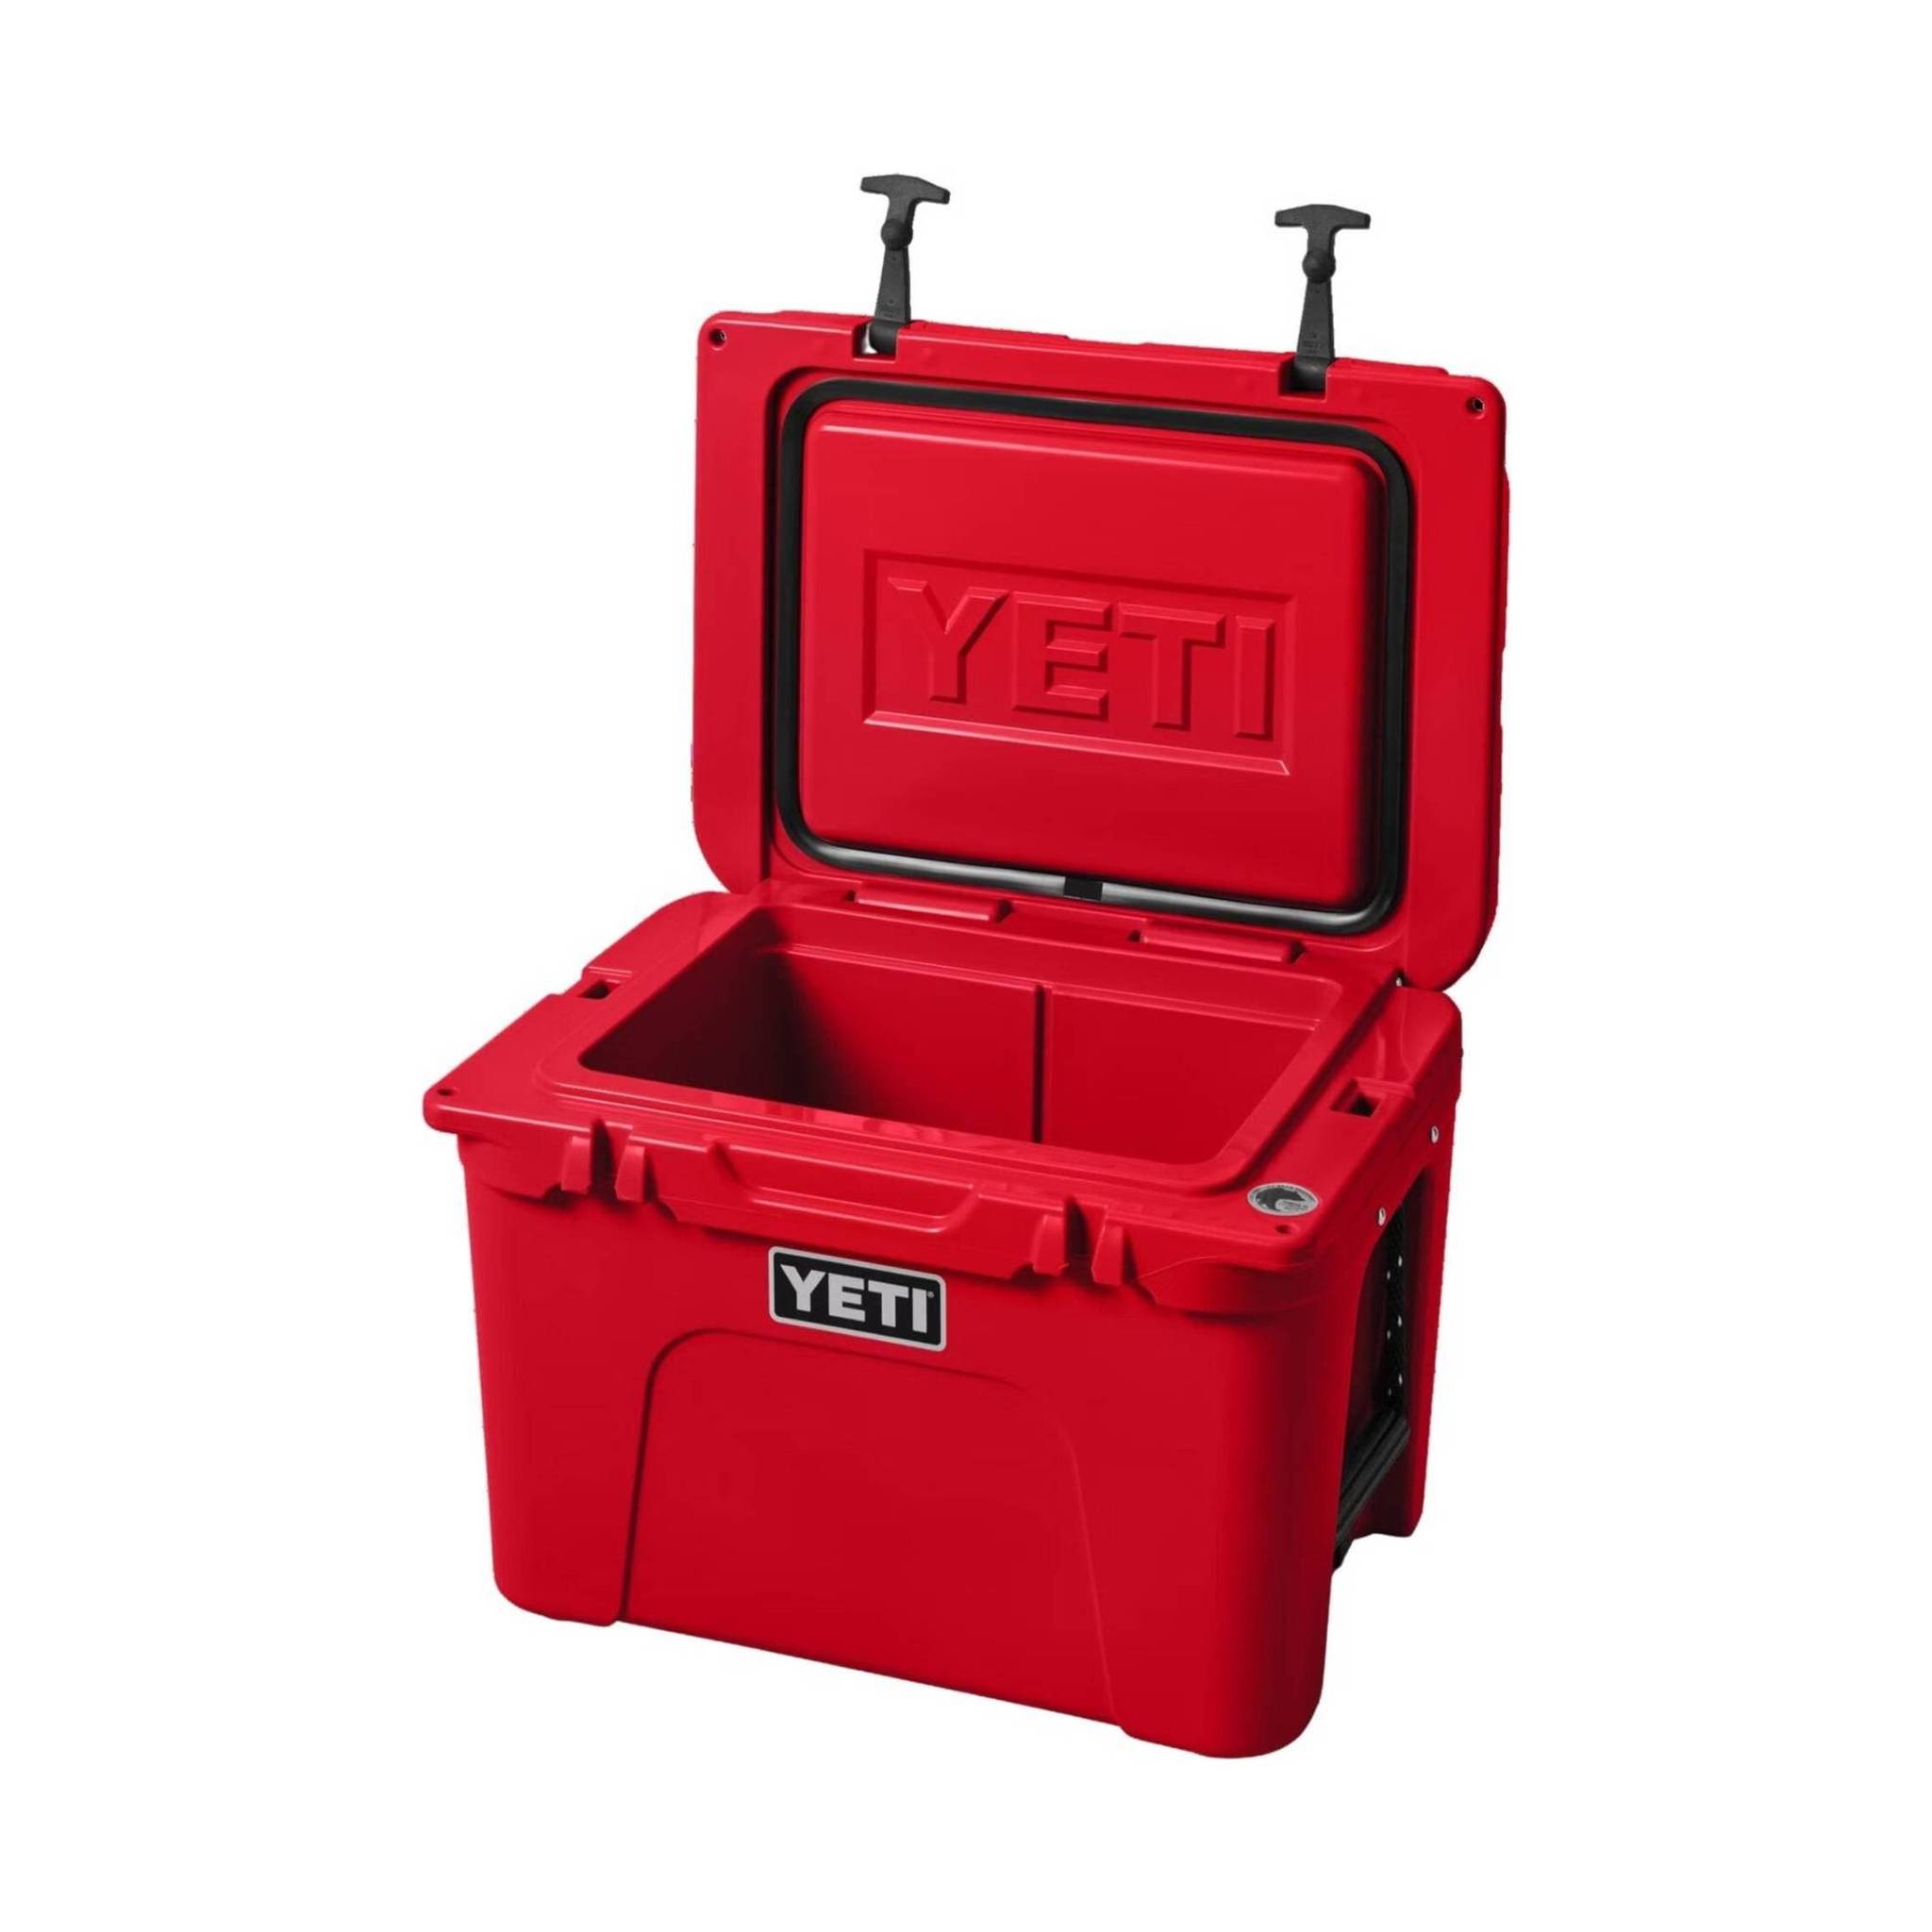 YETI Tundra 35 Hard Cooler - Rescue Red (Limited Edition